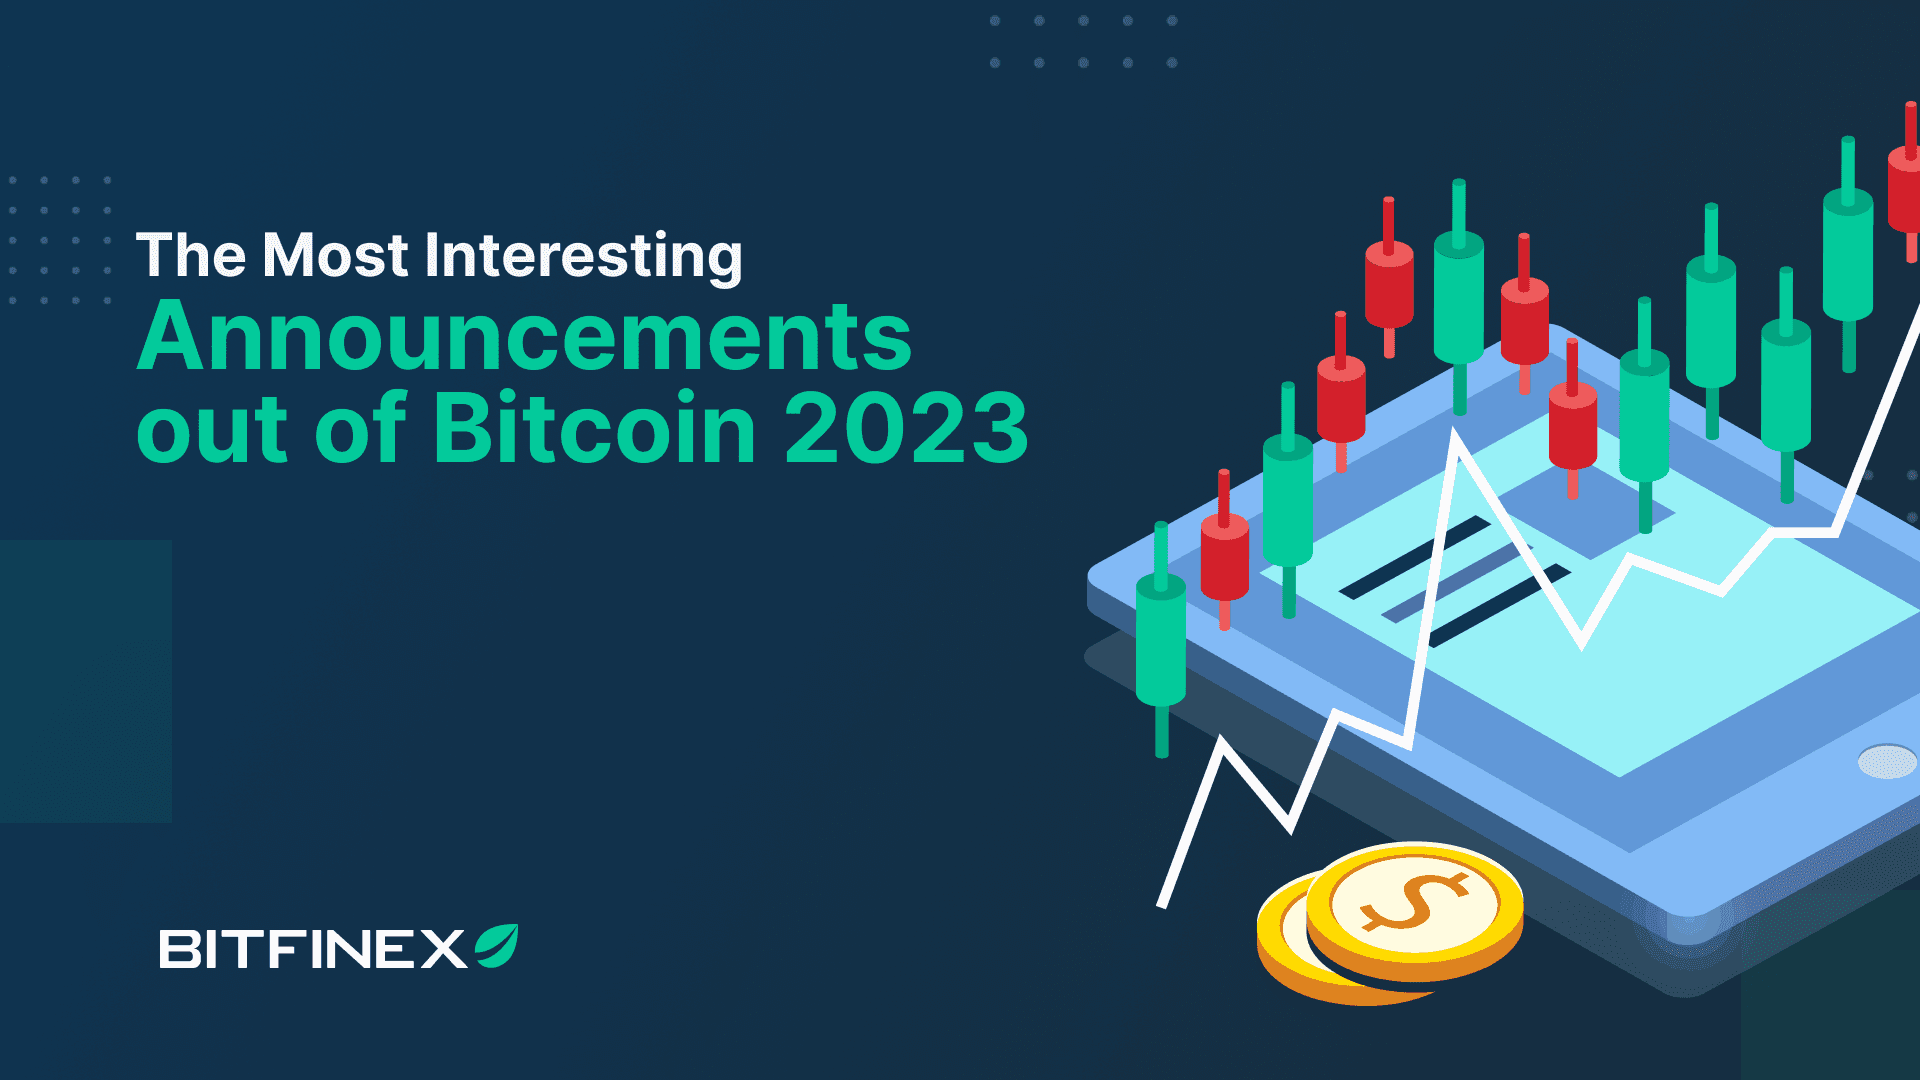 The Most Interesting Announcements out of Bitcoin 2023